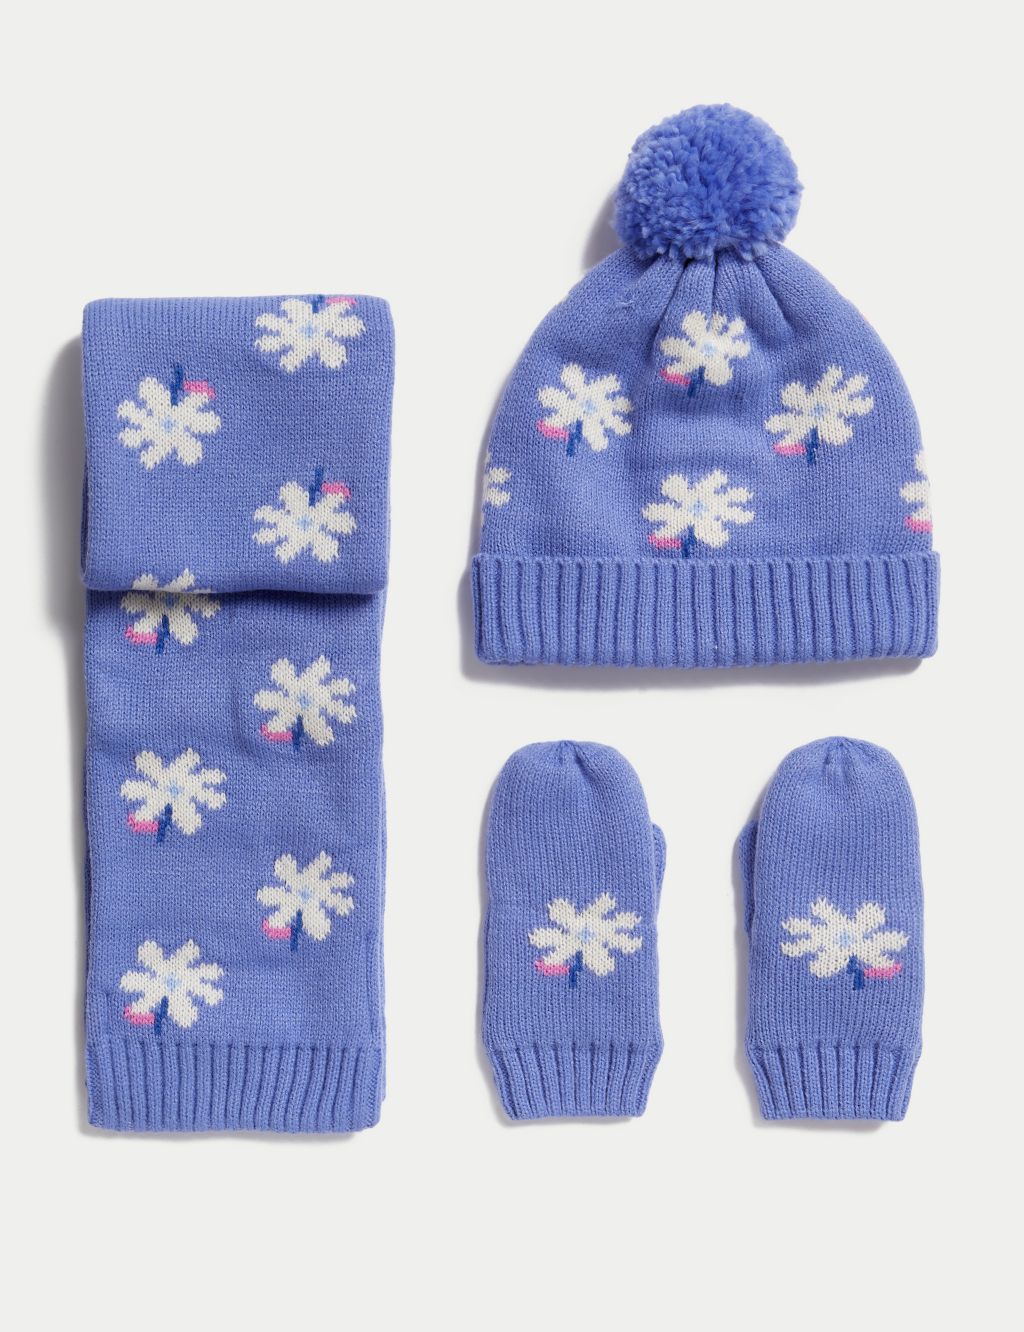 Kids' Floral Hat, Scarf and Mitten Set (1-6 Yrs) image 1